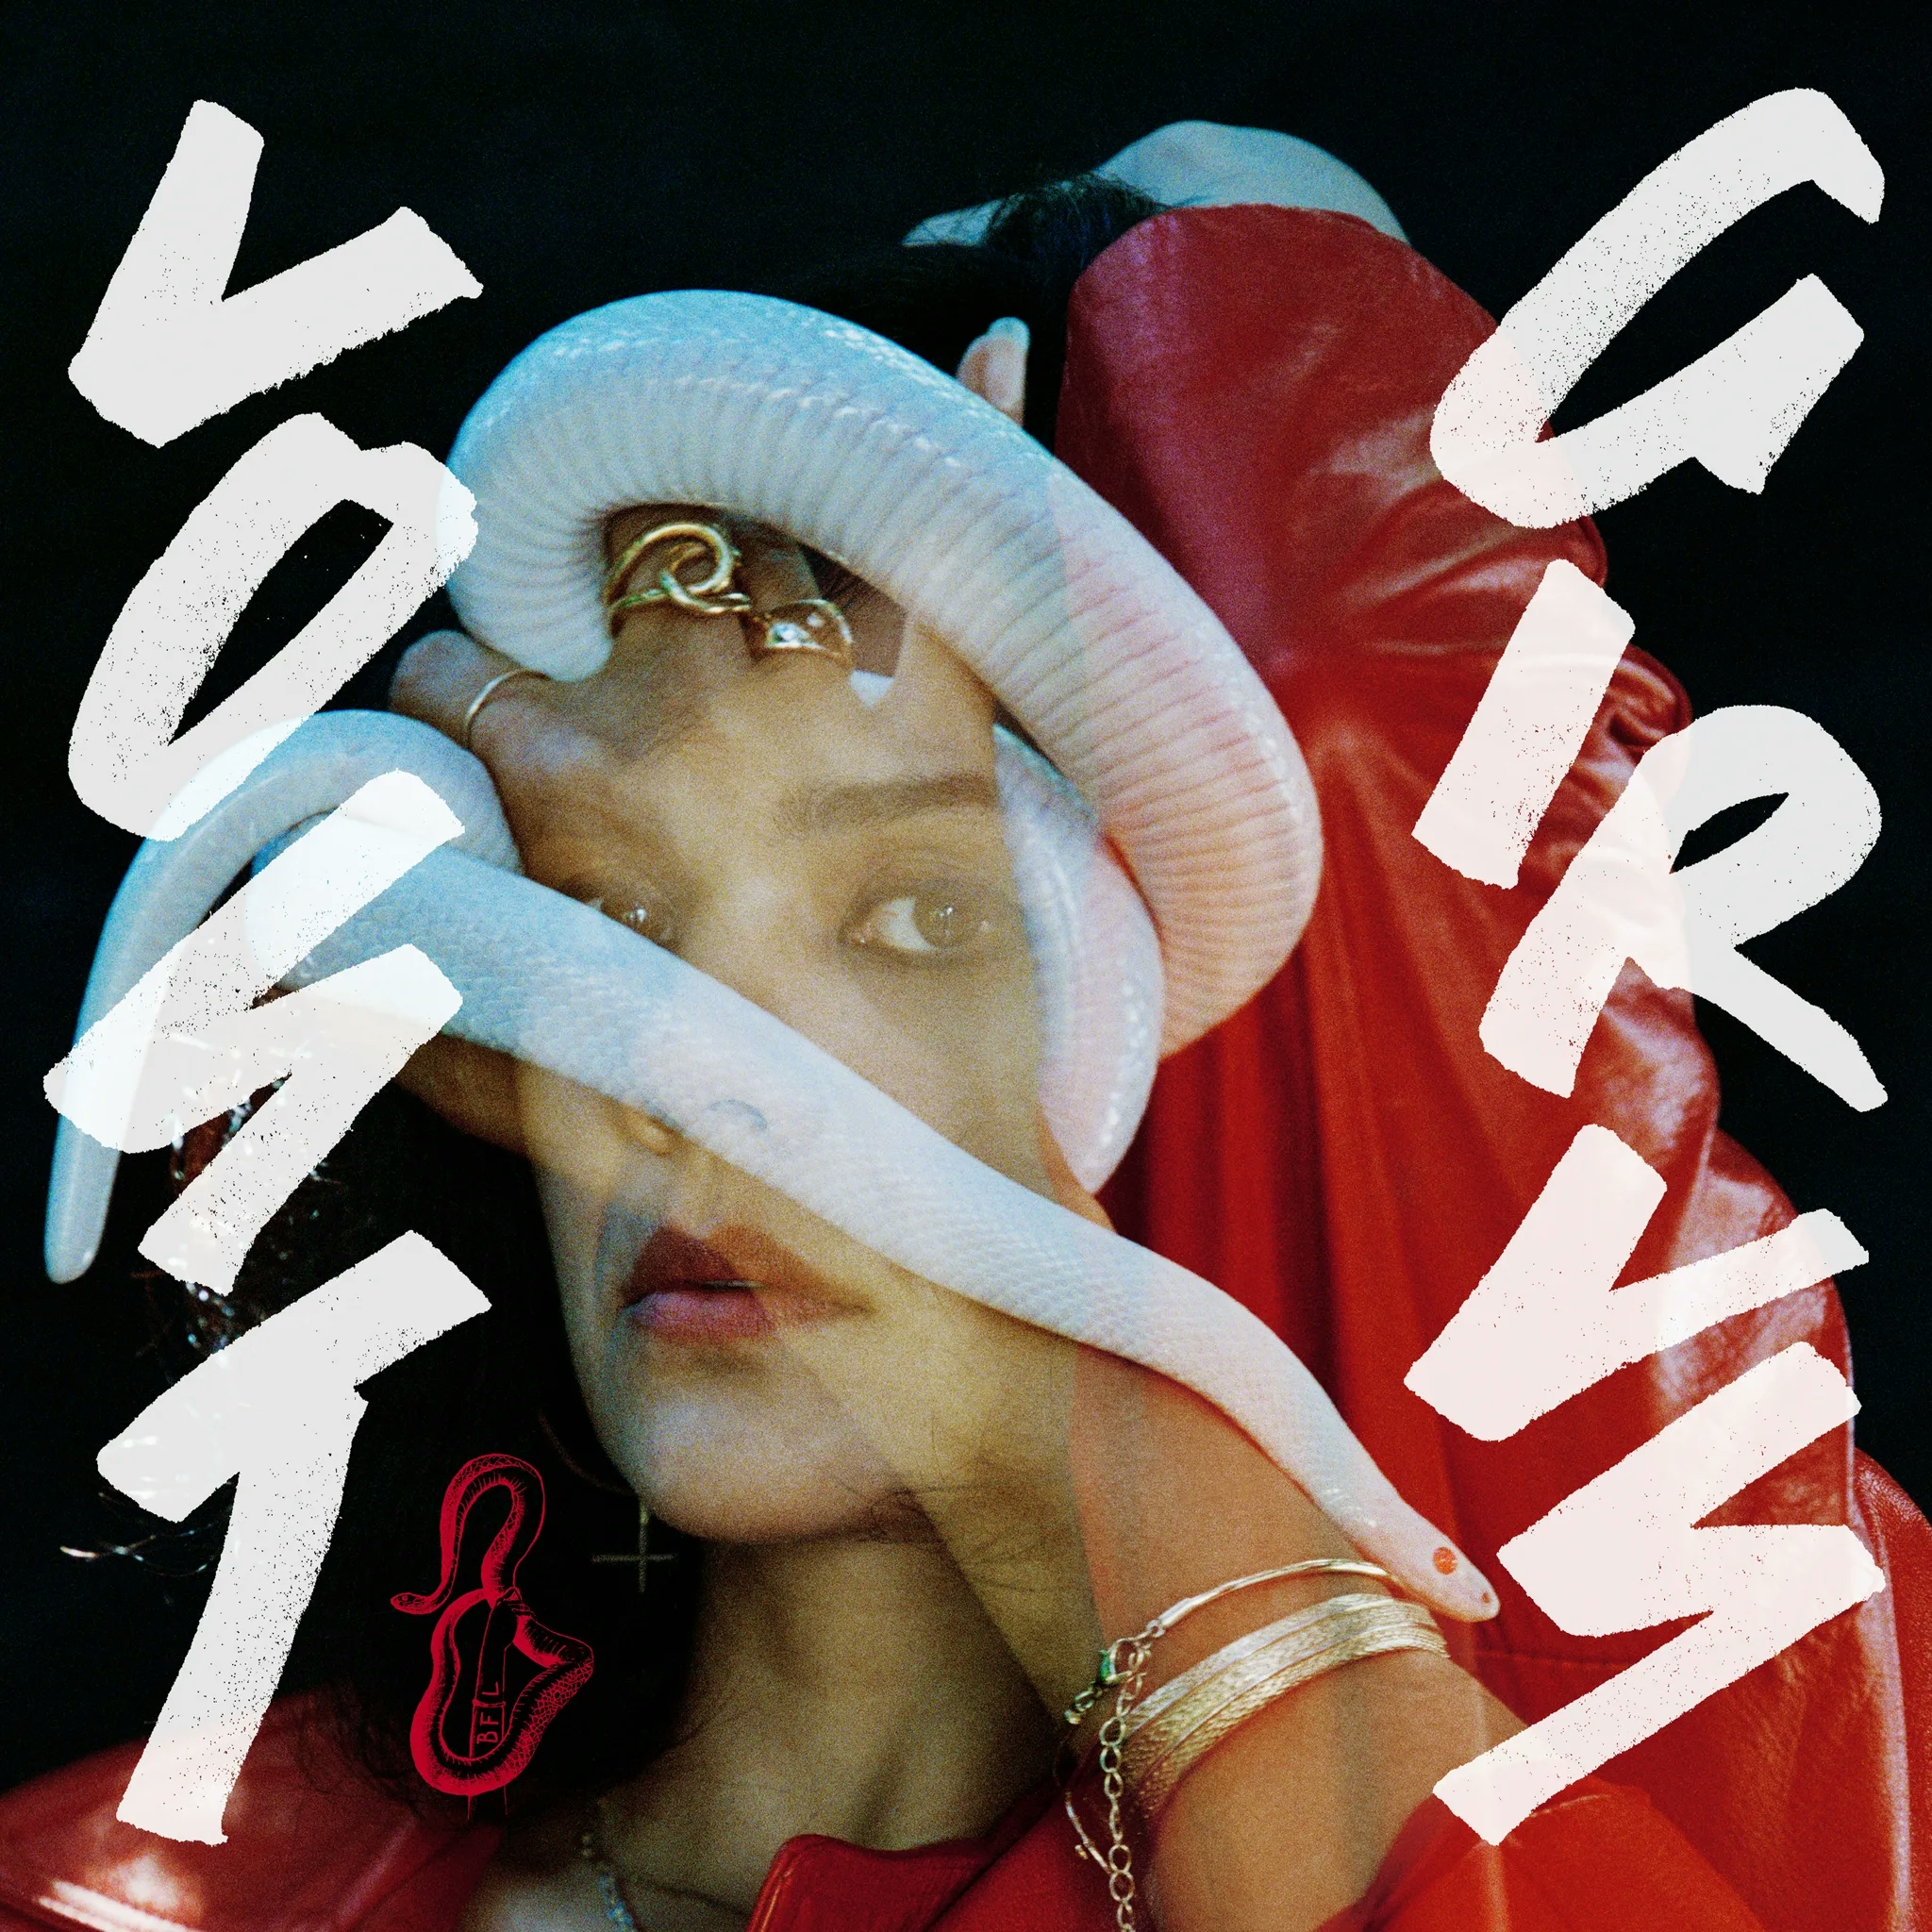 Album artwork for Lost Girls by Bat For Lashes